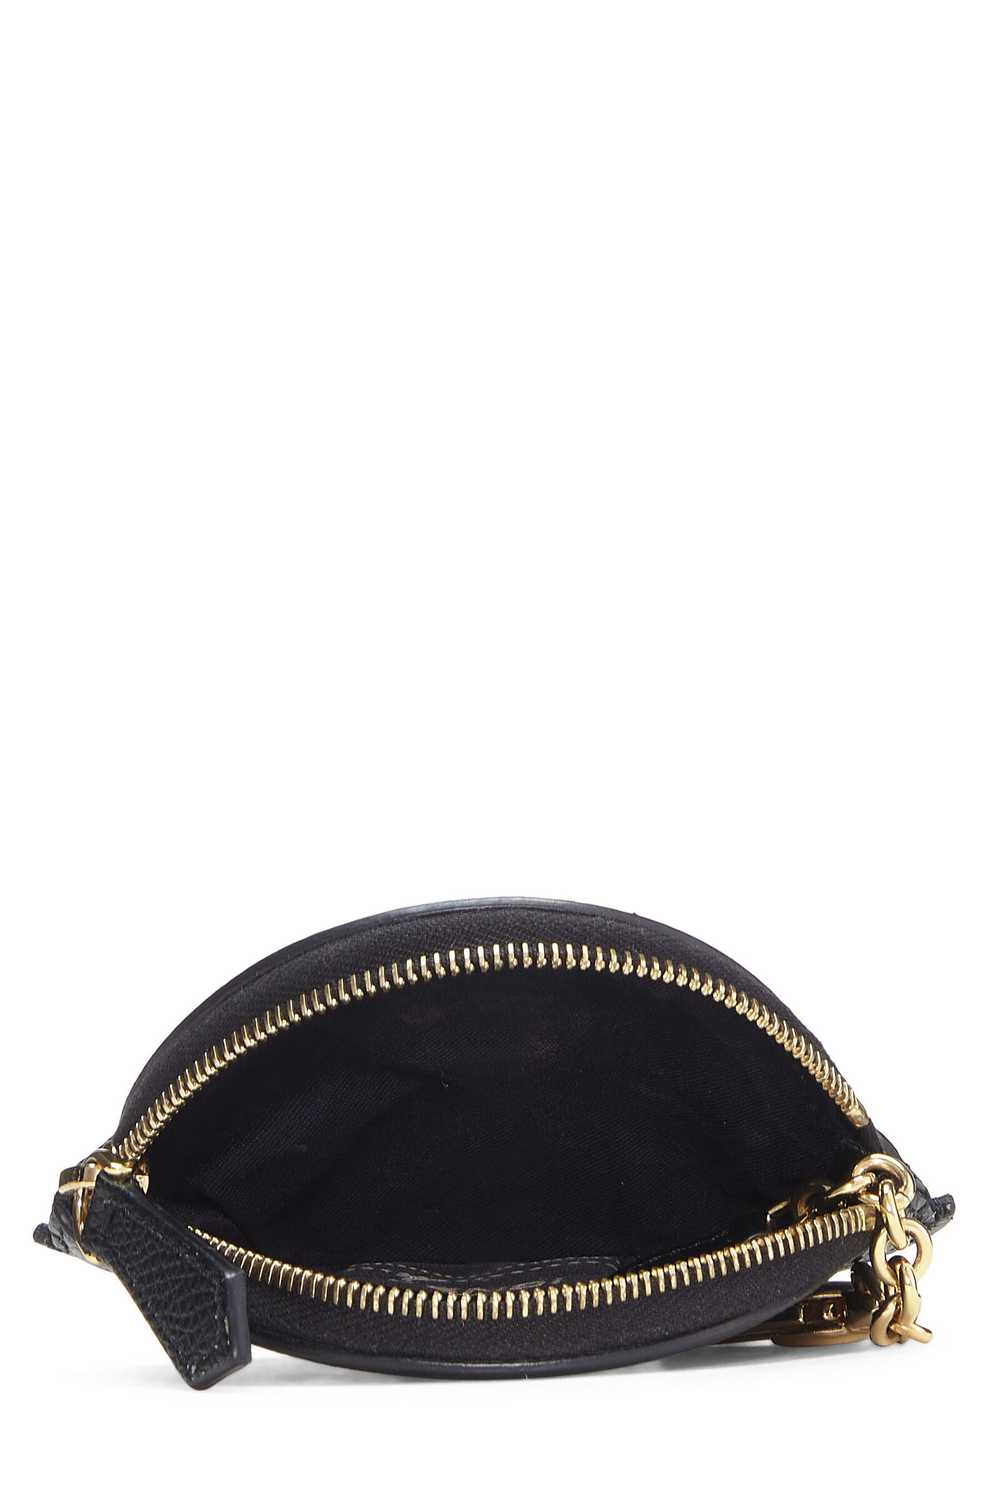 Black Leather Round Coin Purse - image 4